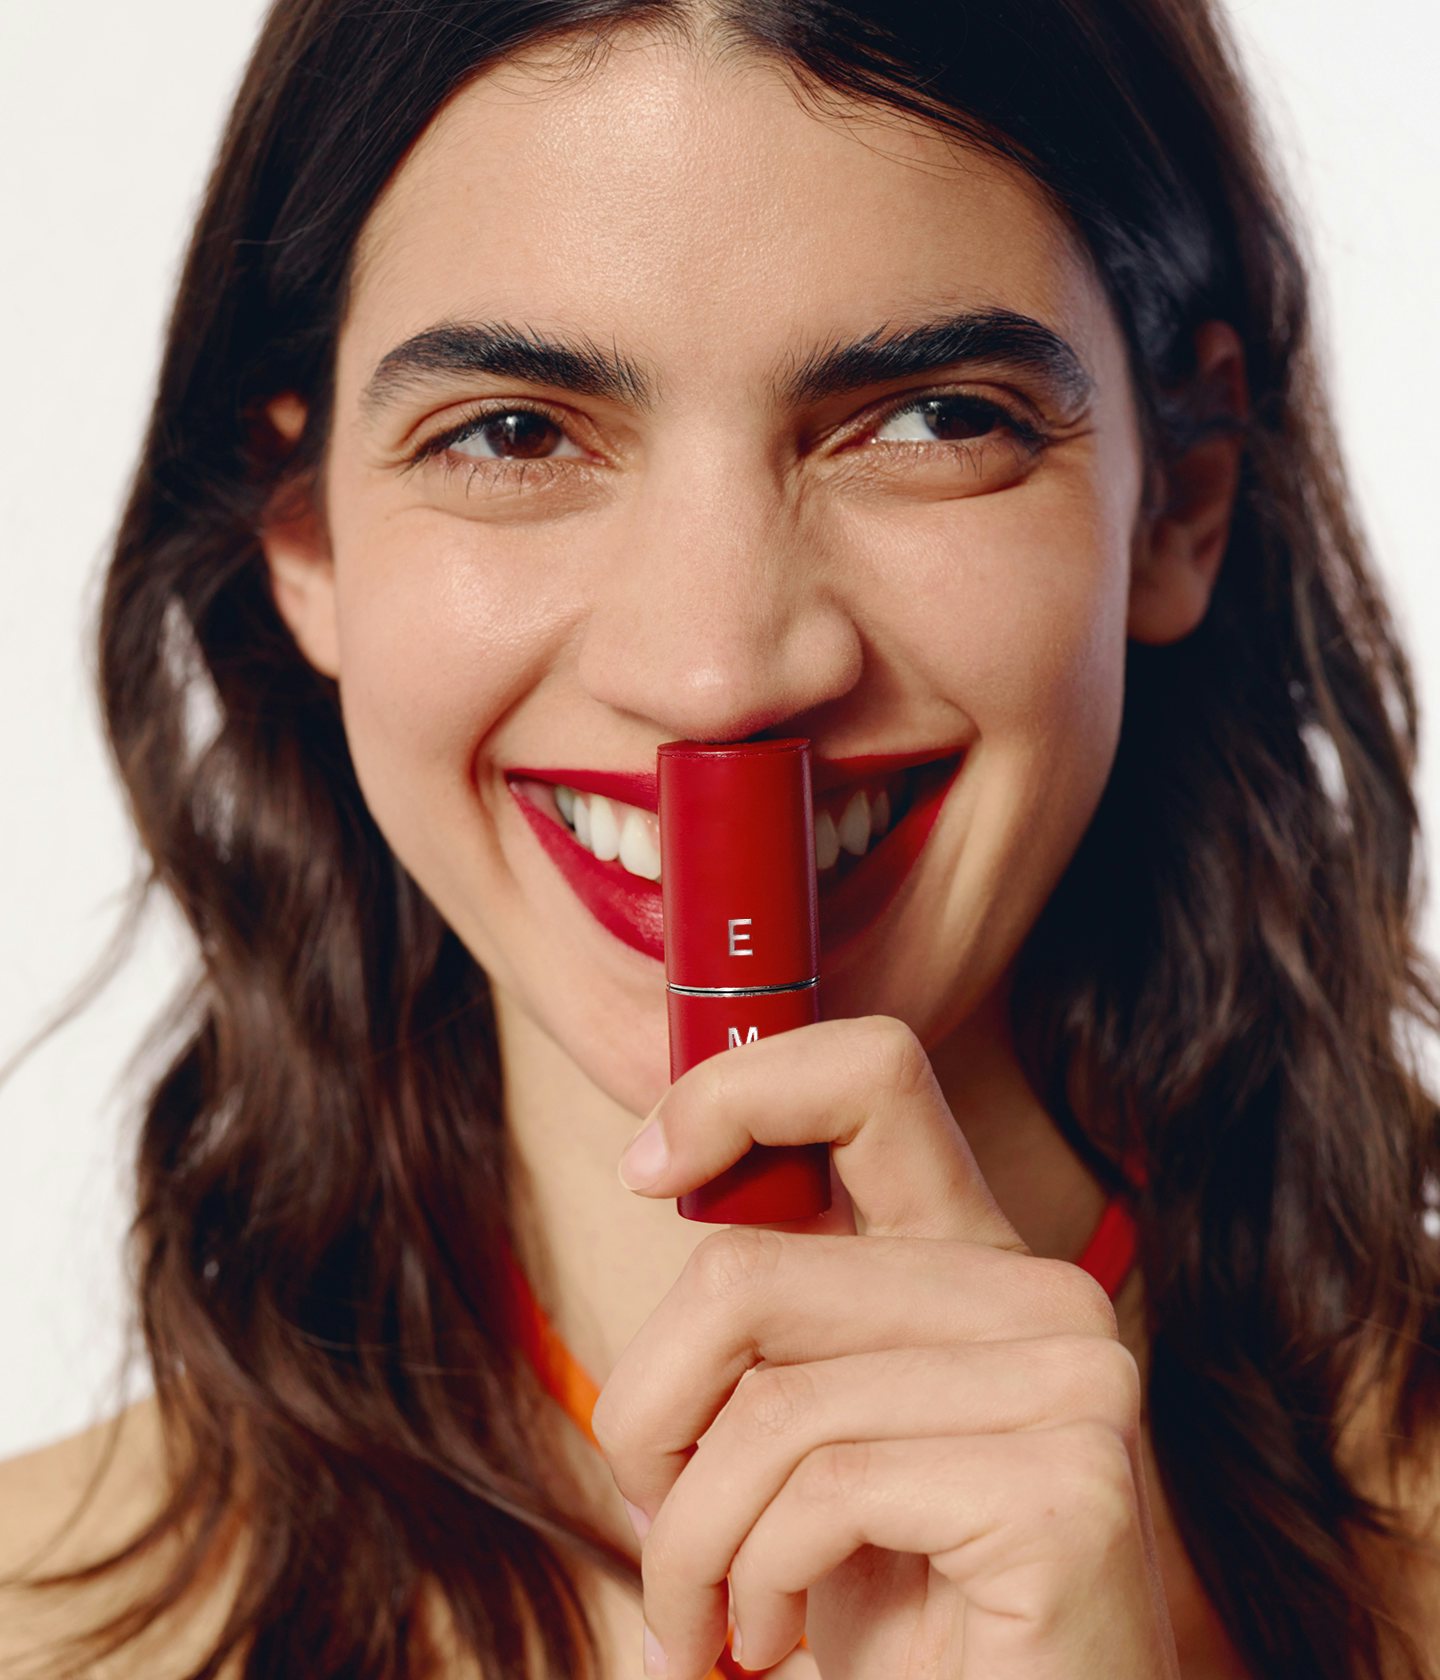 La bouche rouge funny faces campaign model wearing Pop Art Red lipstick shade with the Red leather case